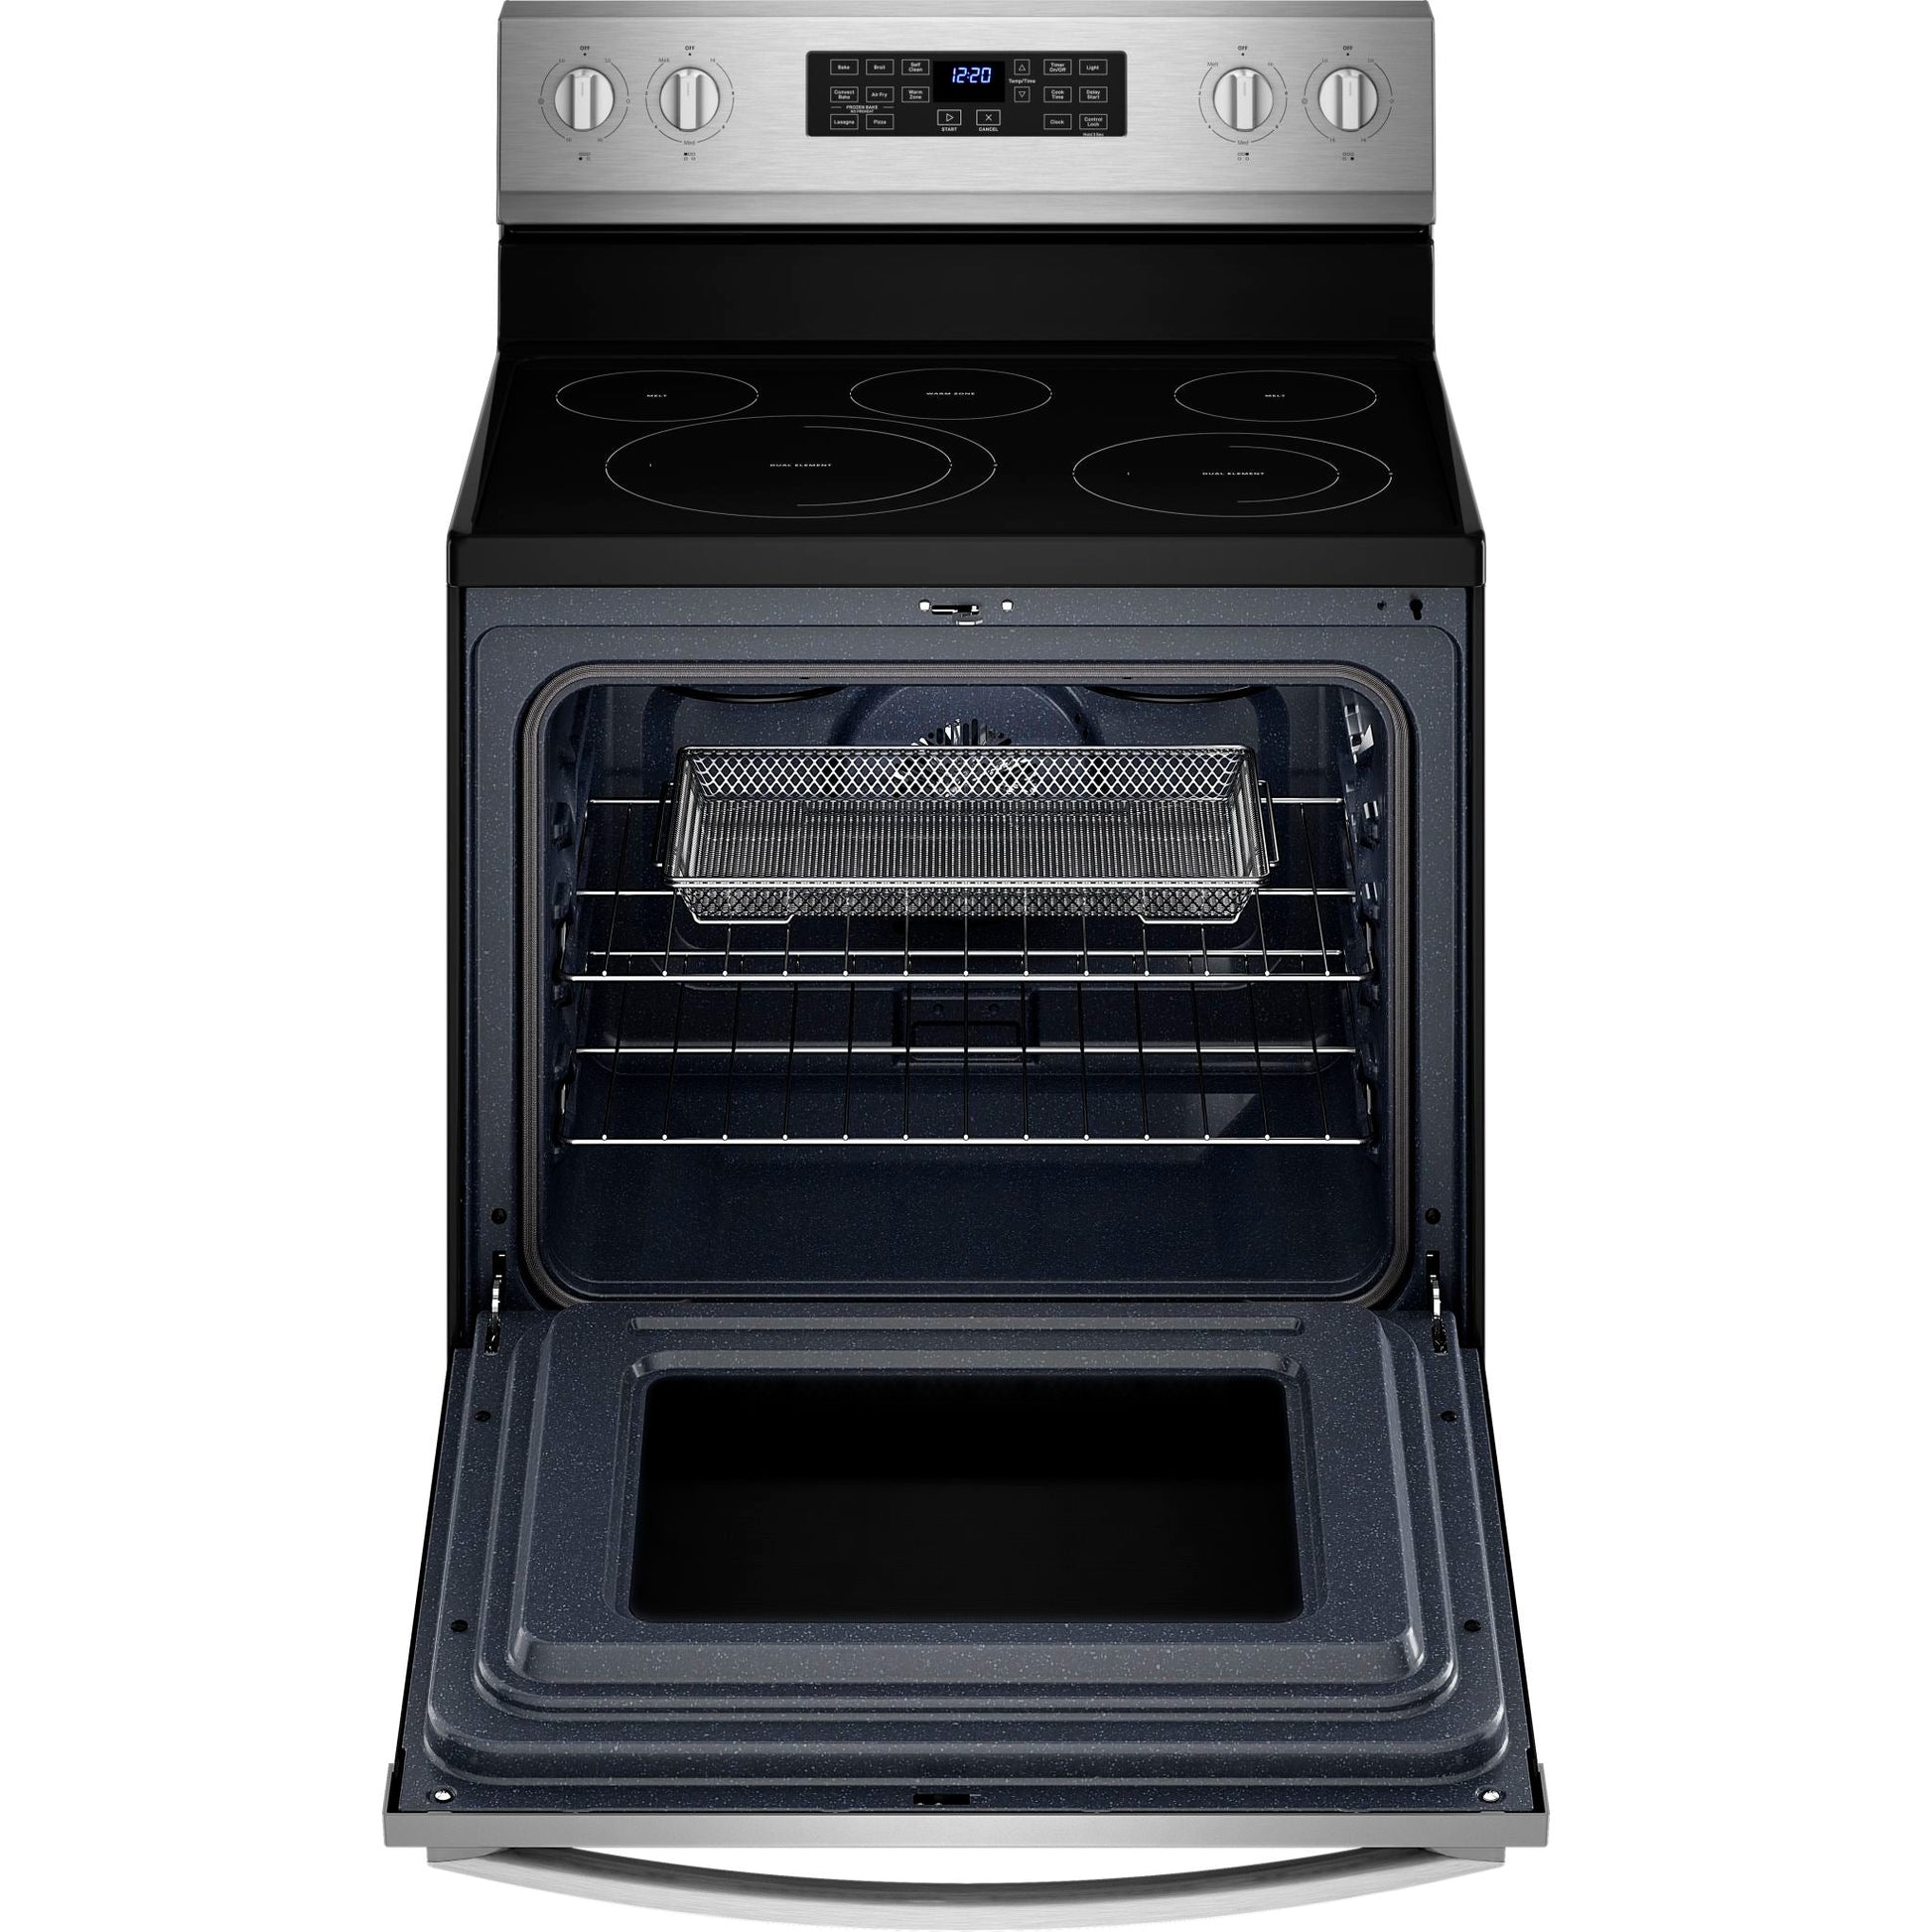 Whirlpool Electric Range (YWFE550S0LZ) - STAINLESS STEEL